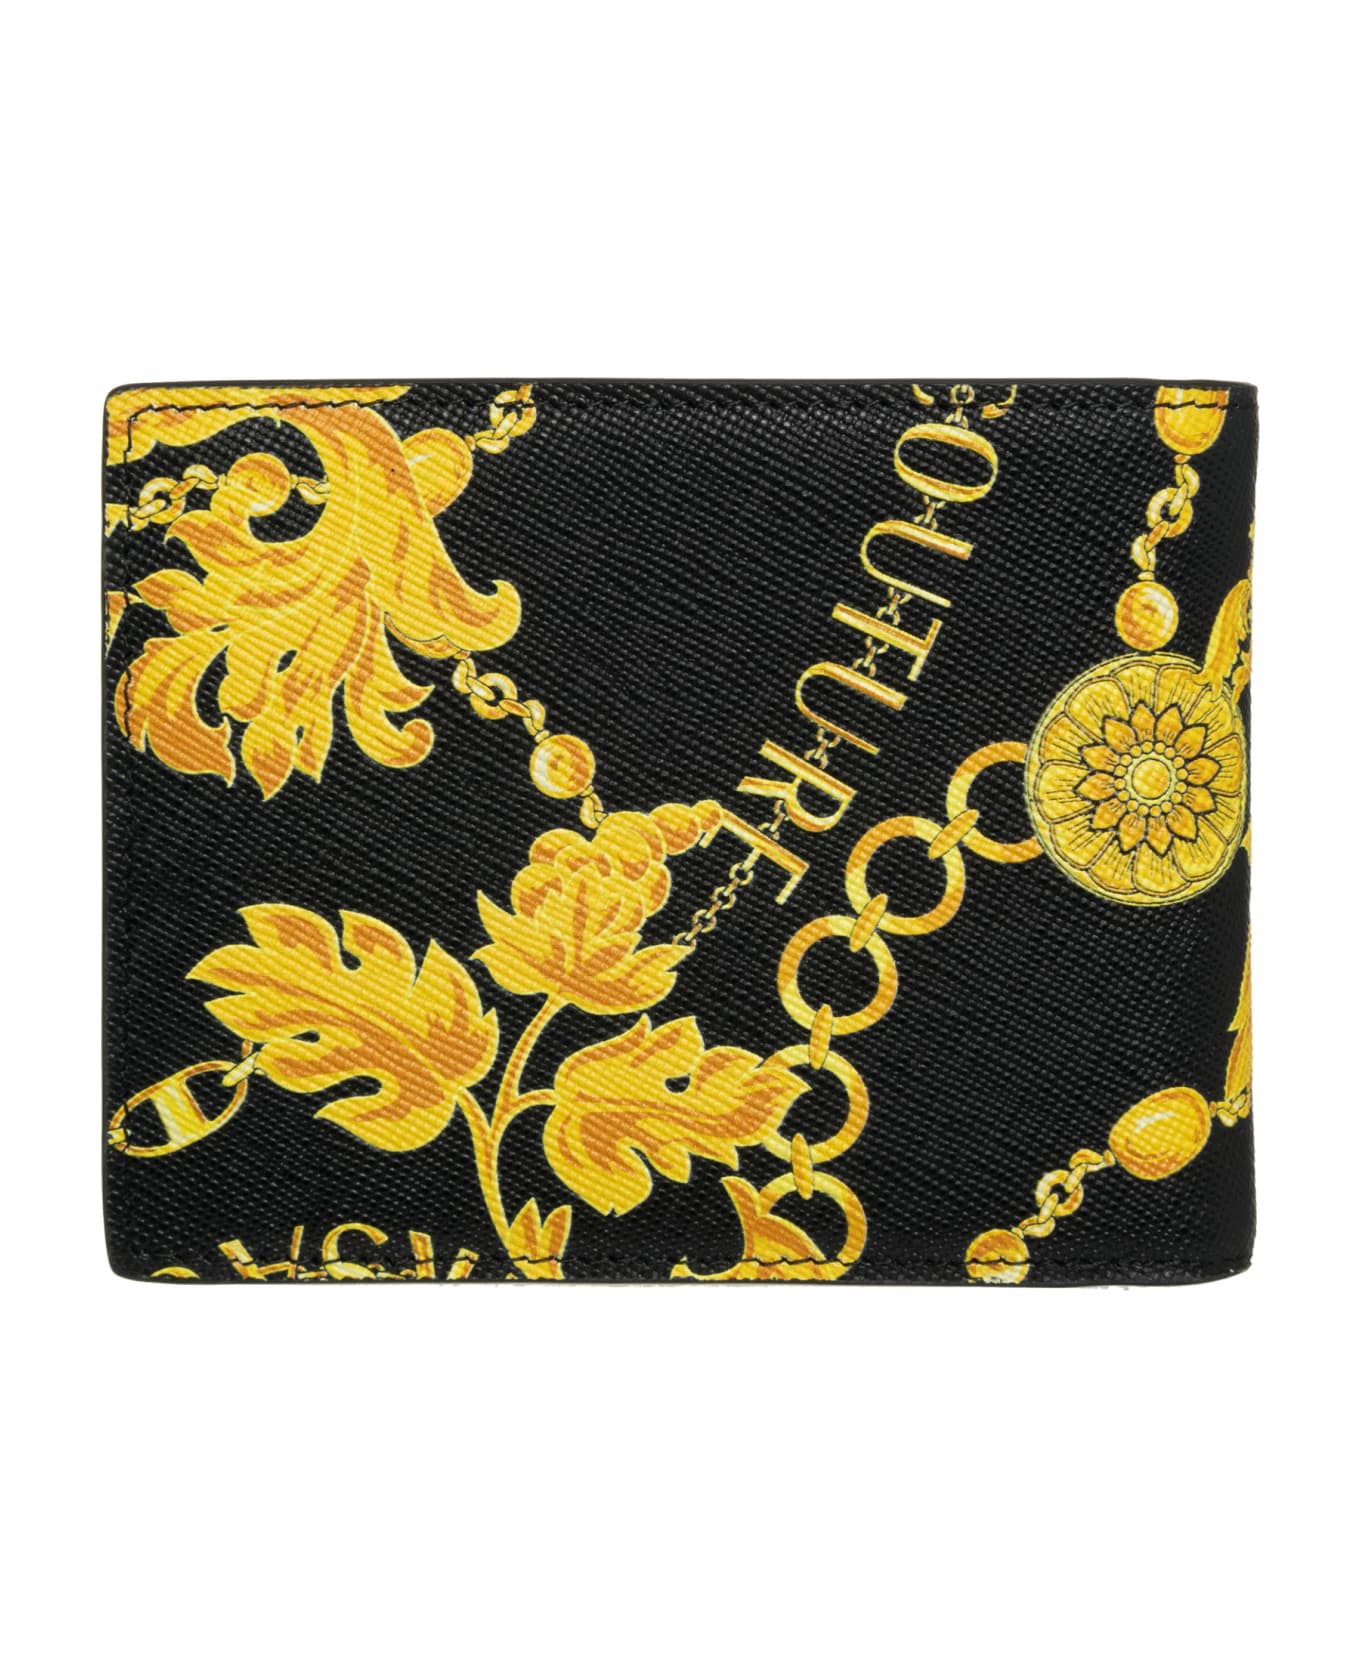 Versace Jeans Couture Leather Wallet 財布